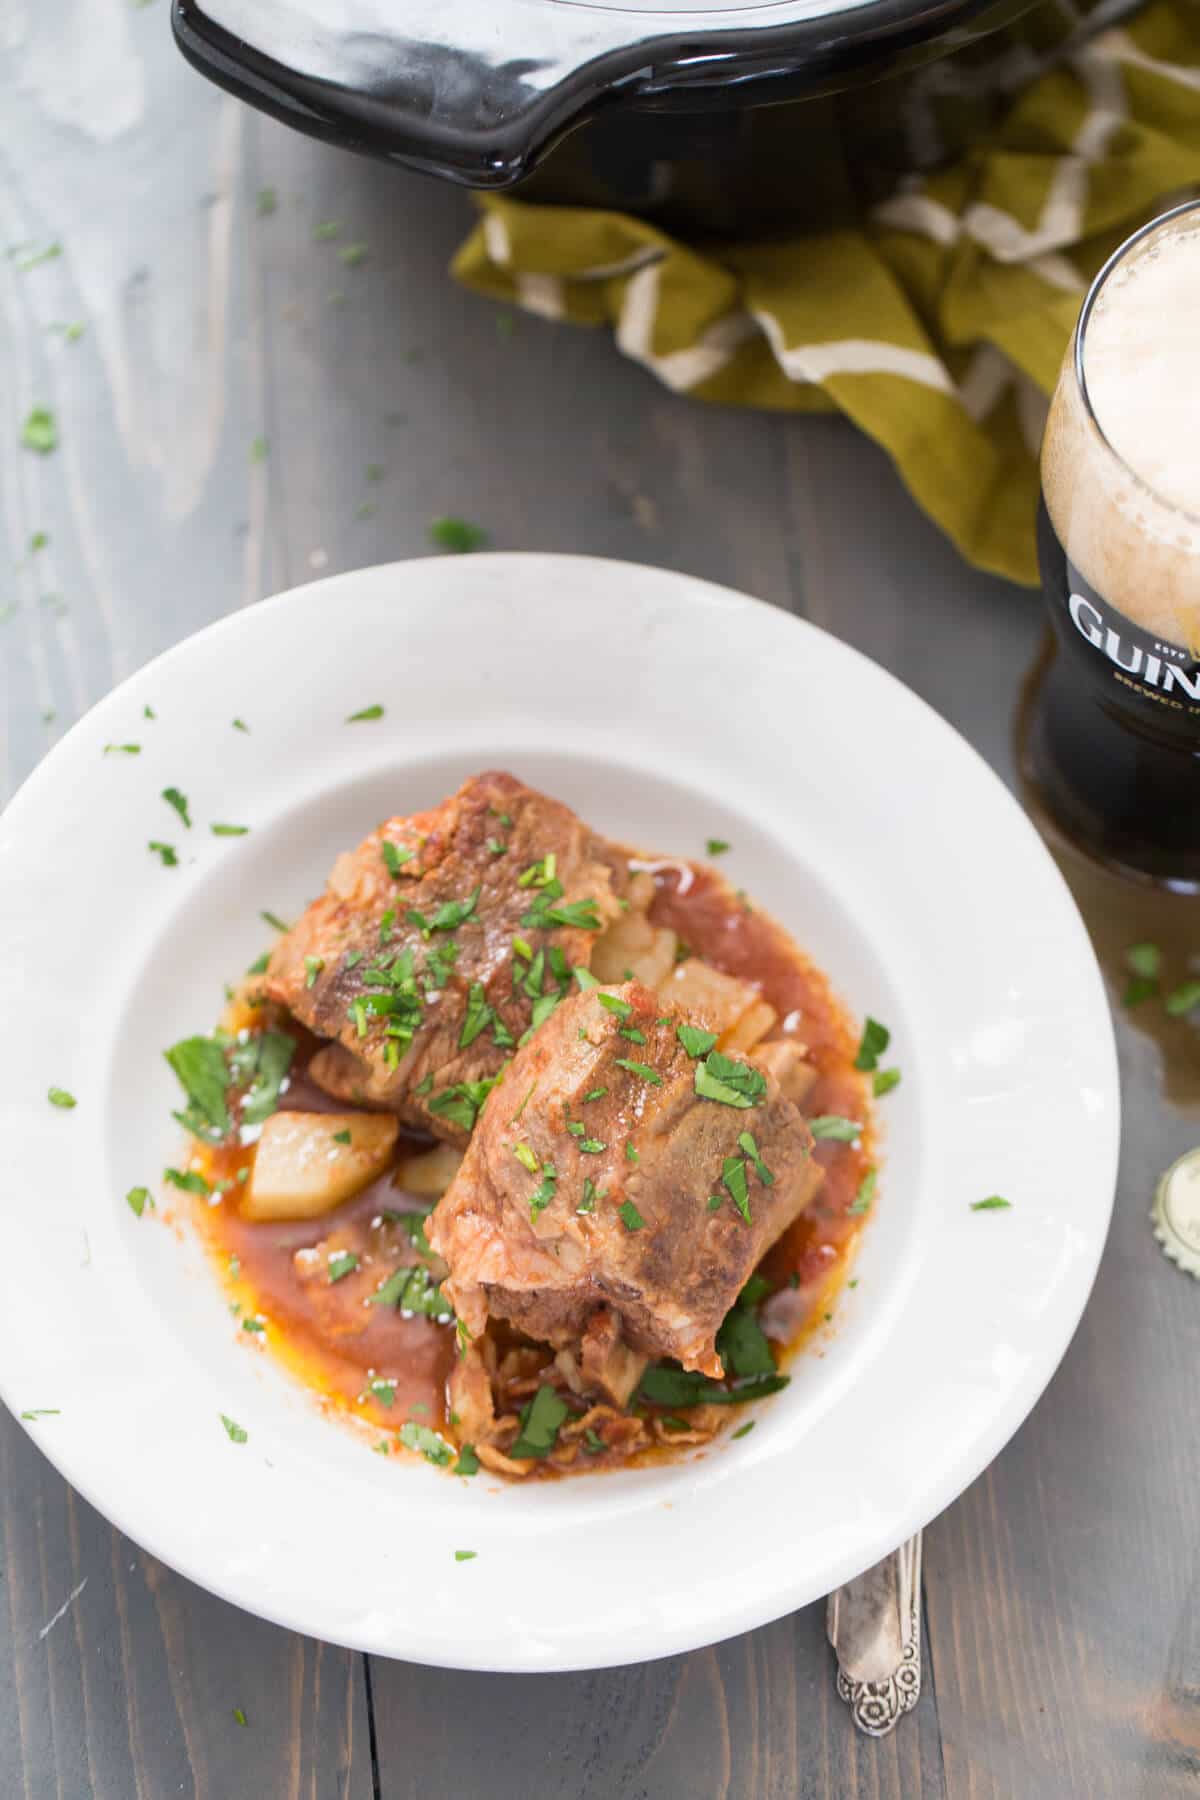 Slow cooker short ribs flavored with Guinness Stout is a satisfying mea.  You are going to love these fork-tender ribs!